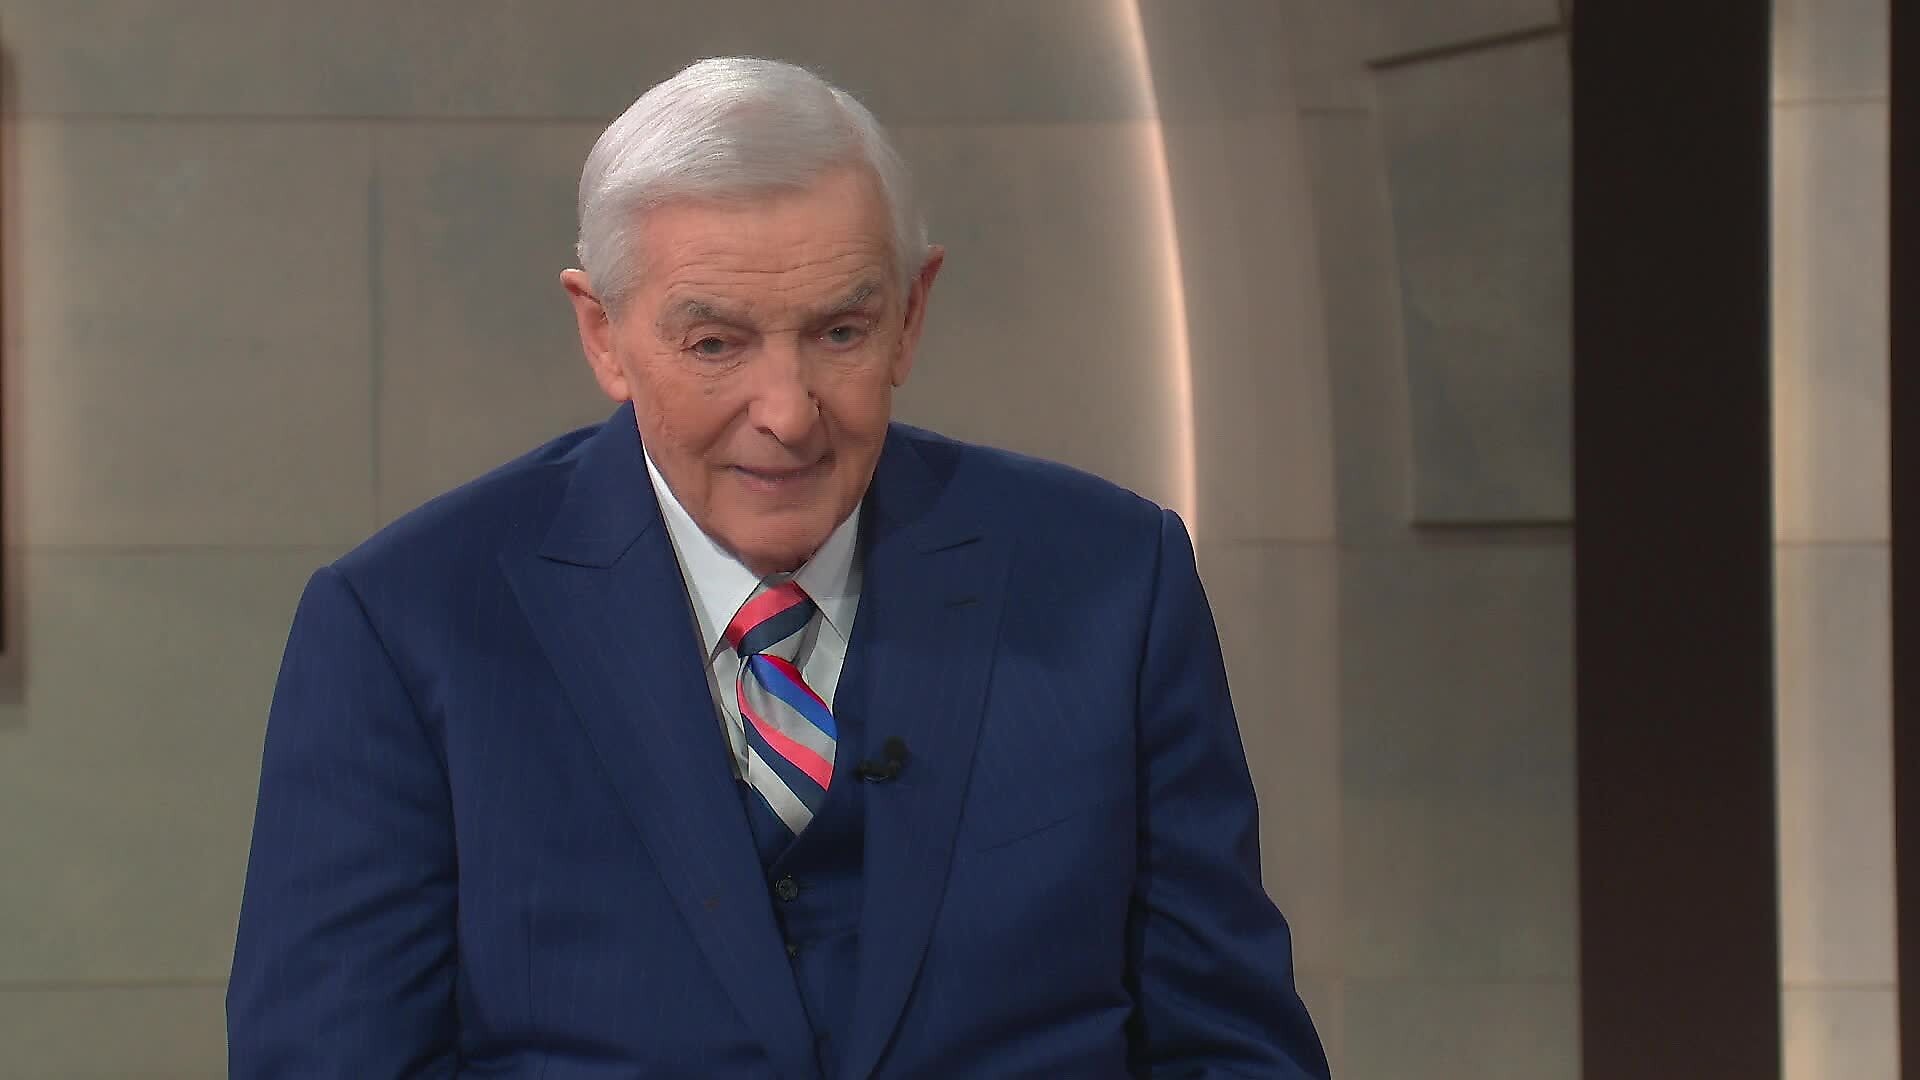 Keep the Faith: Interview with Dr David Jeremiah